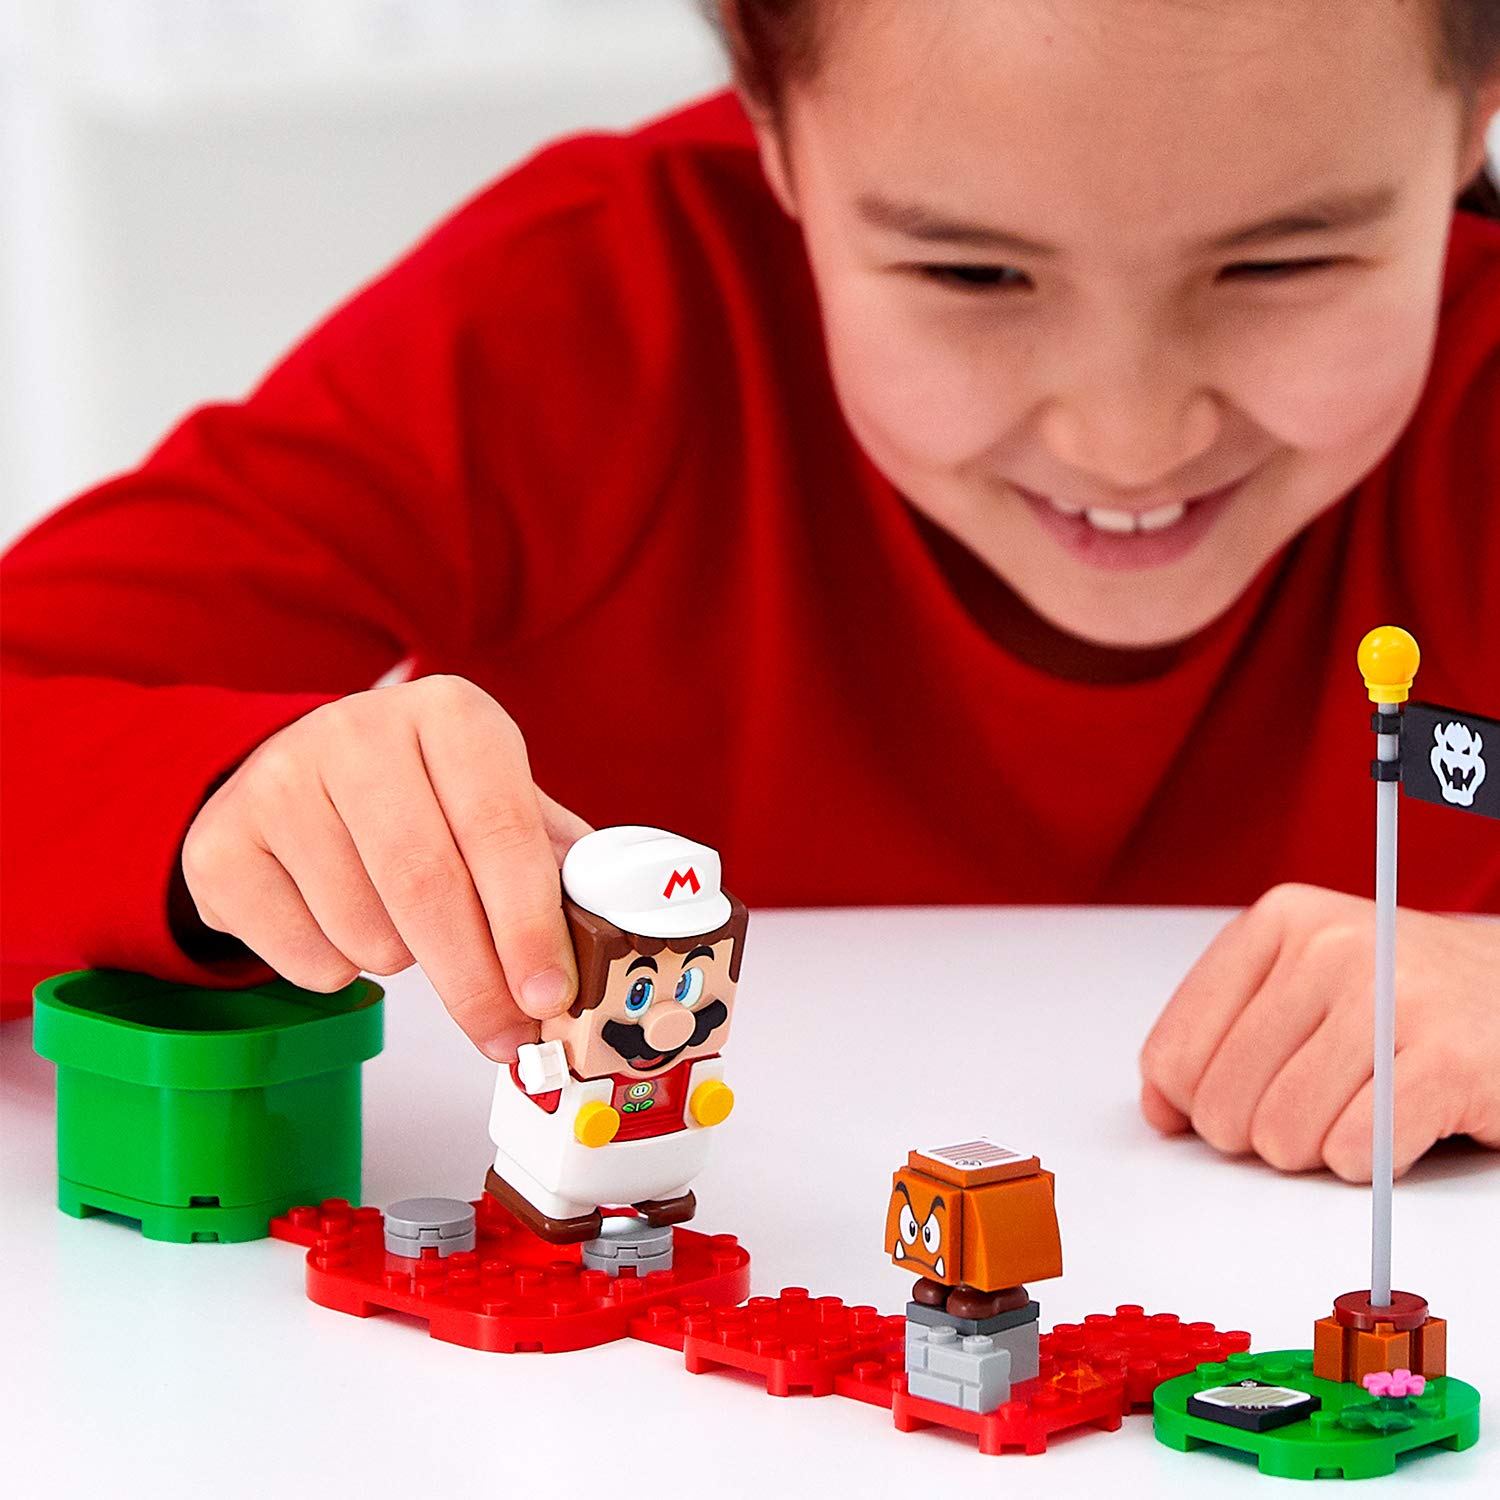 LEGO Super Mario Fire Mario Power-Up Pack 71370; Building Kit for Creative Kids to Power Up The Mario Figure in The Adventures with Mario Starter Course (71360) Playset (11 Pieces)